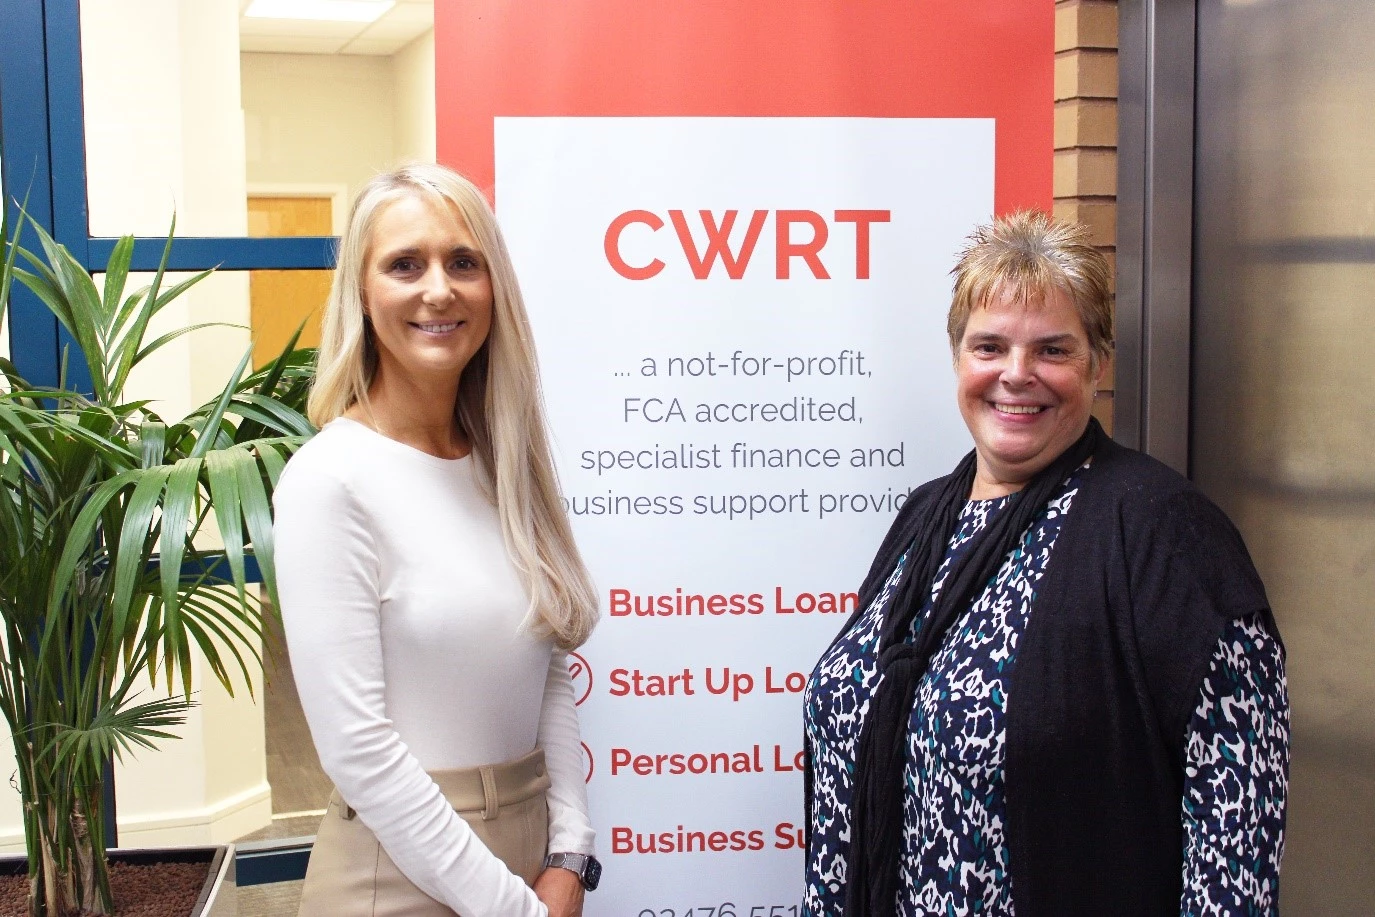 Sheridan Sulskis from CWRT (left) with Mandy Bygrave from Coventry & Warwickshire CDA